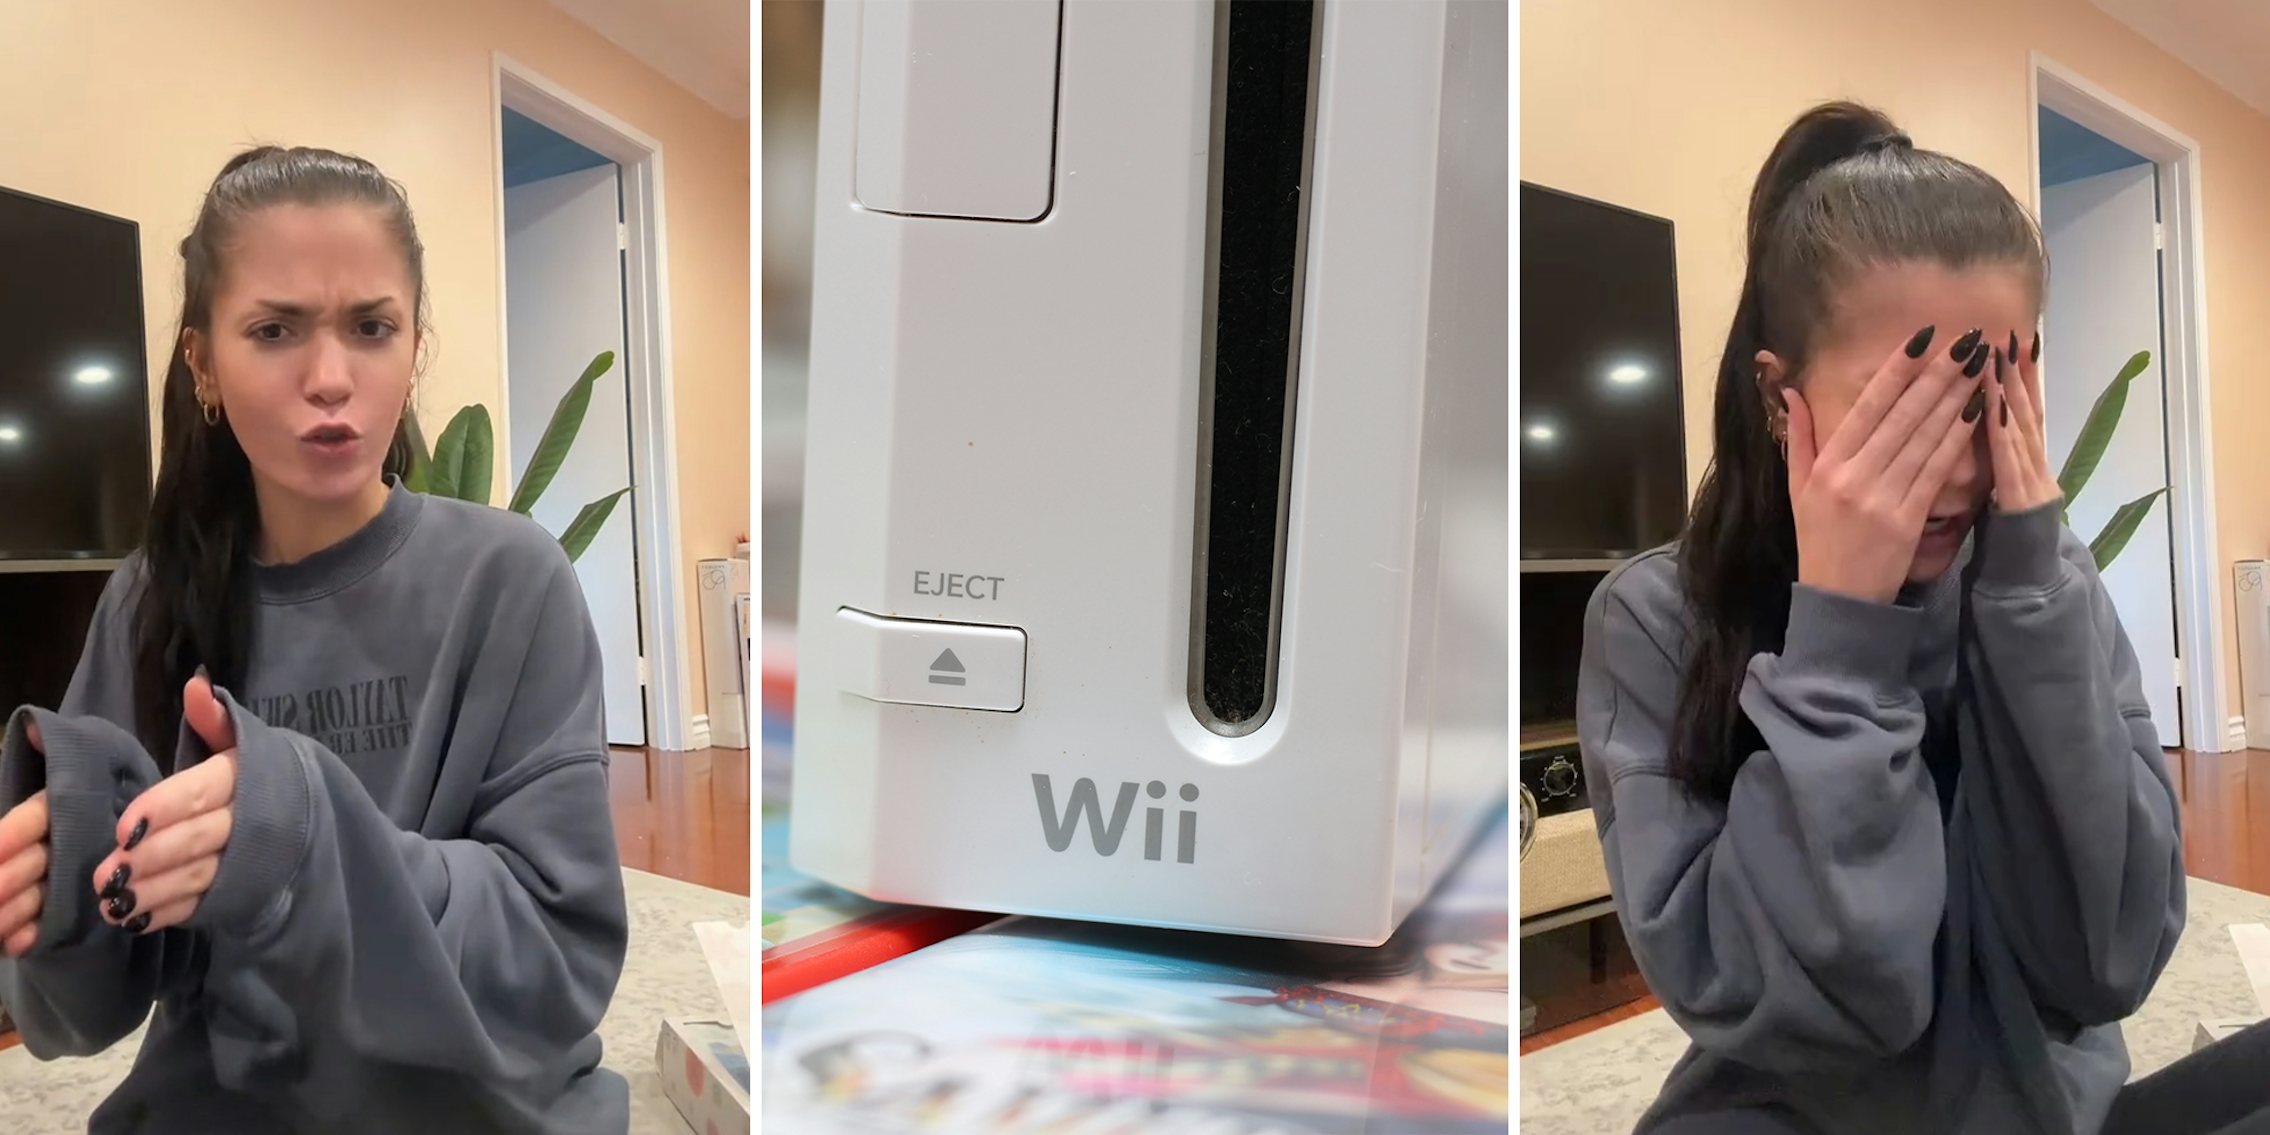 Woman flirts with NFL player about Wii Michael Jackson game. Then he buys a Wii on eBay and posts it to his Stories